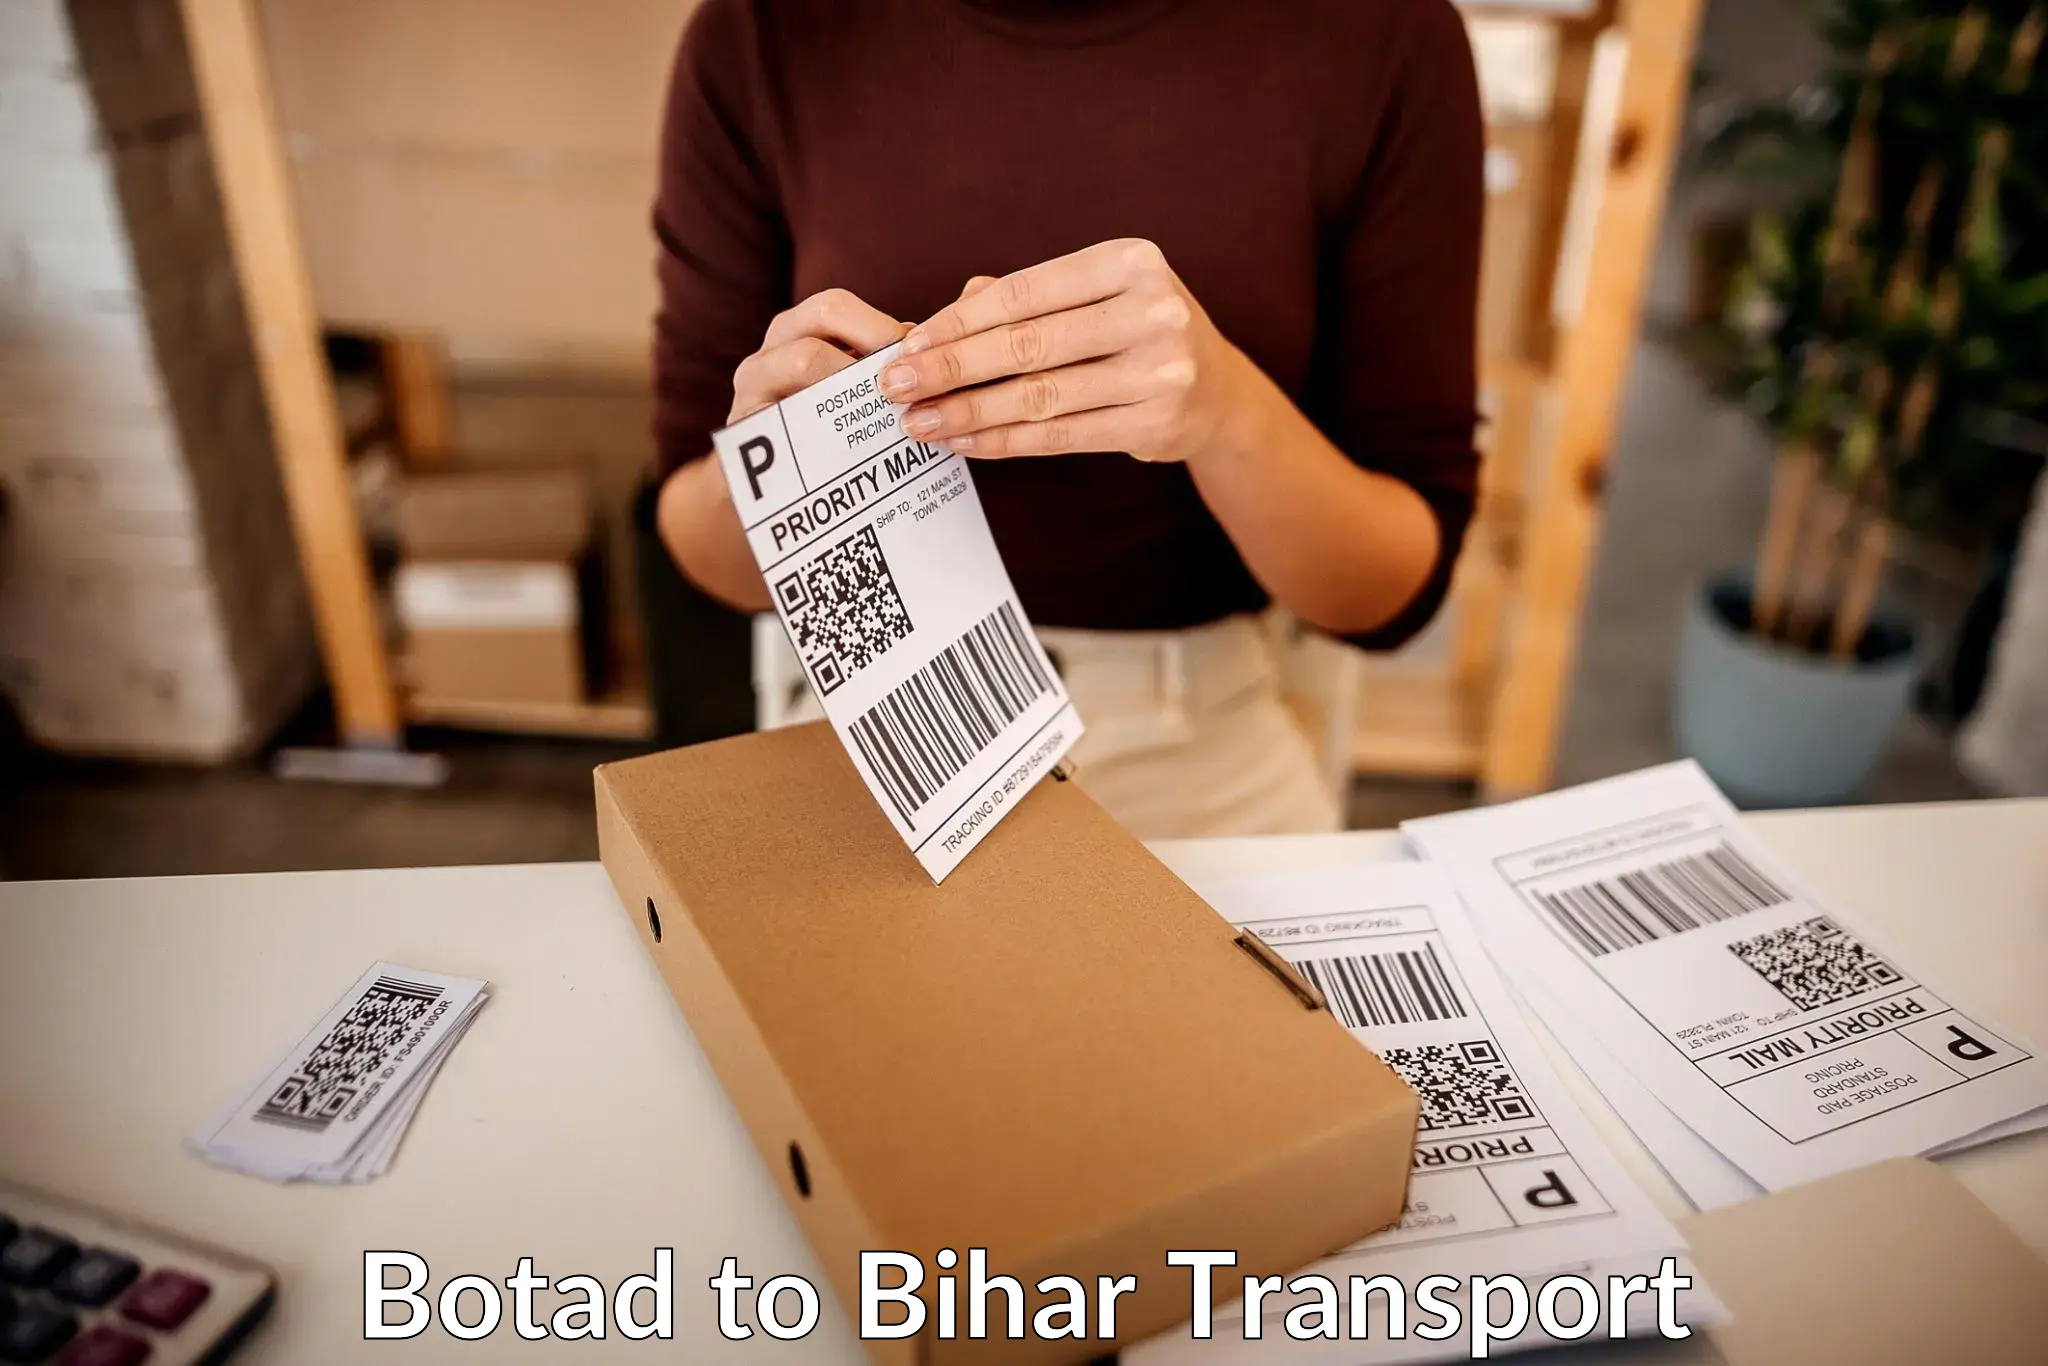 Commercial transport service Botad to Bettiah